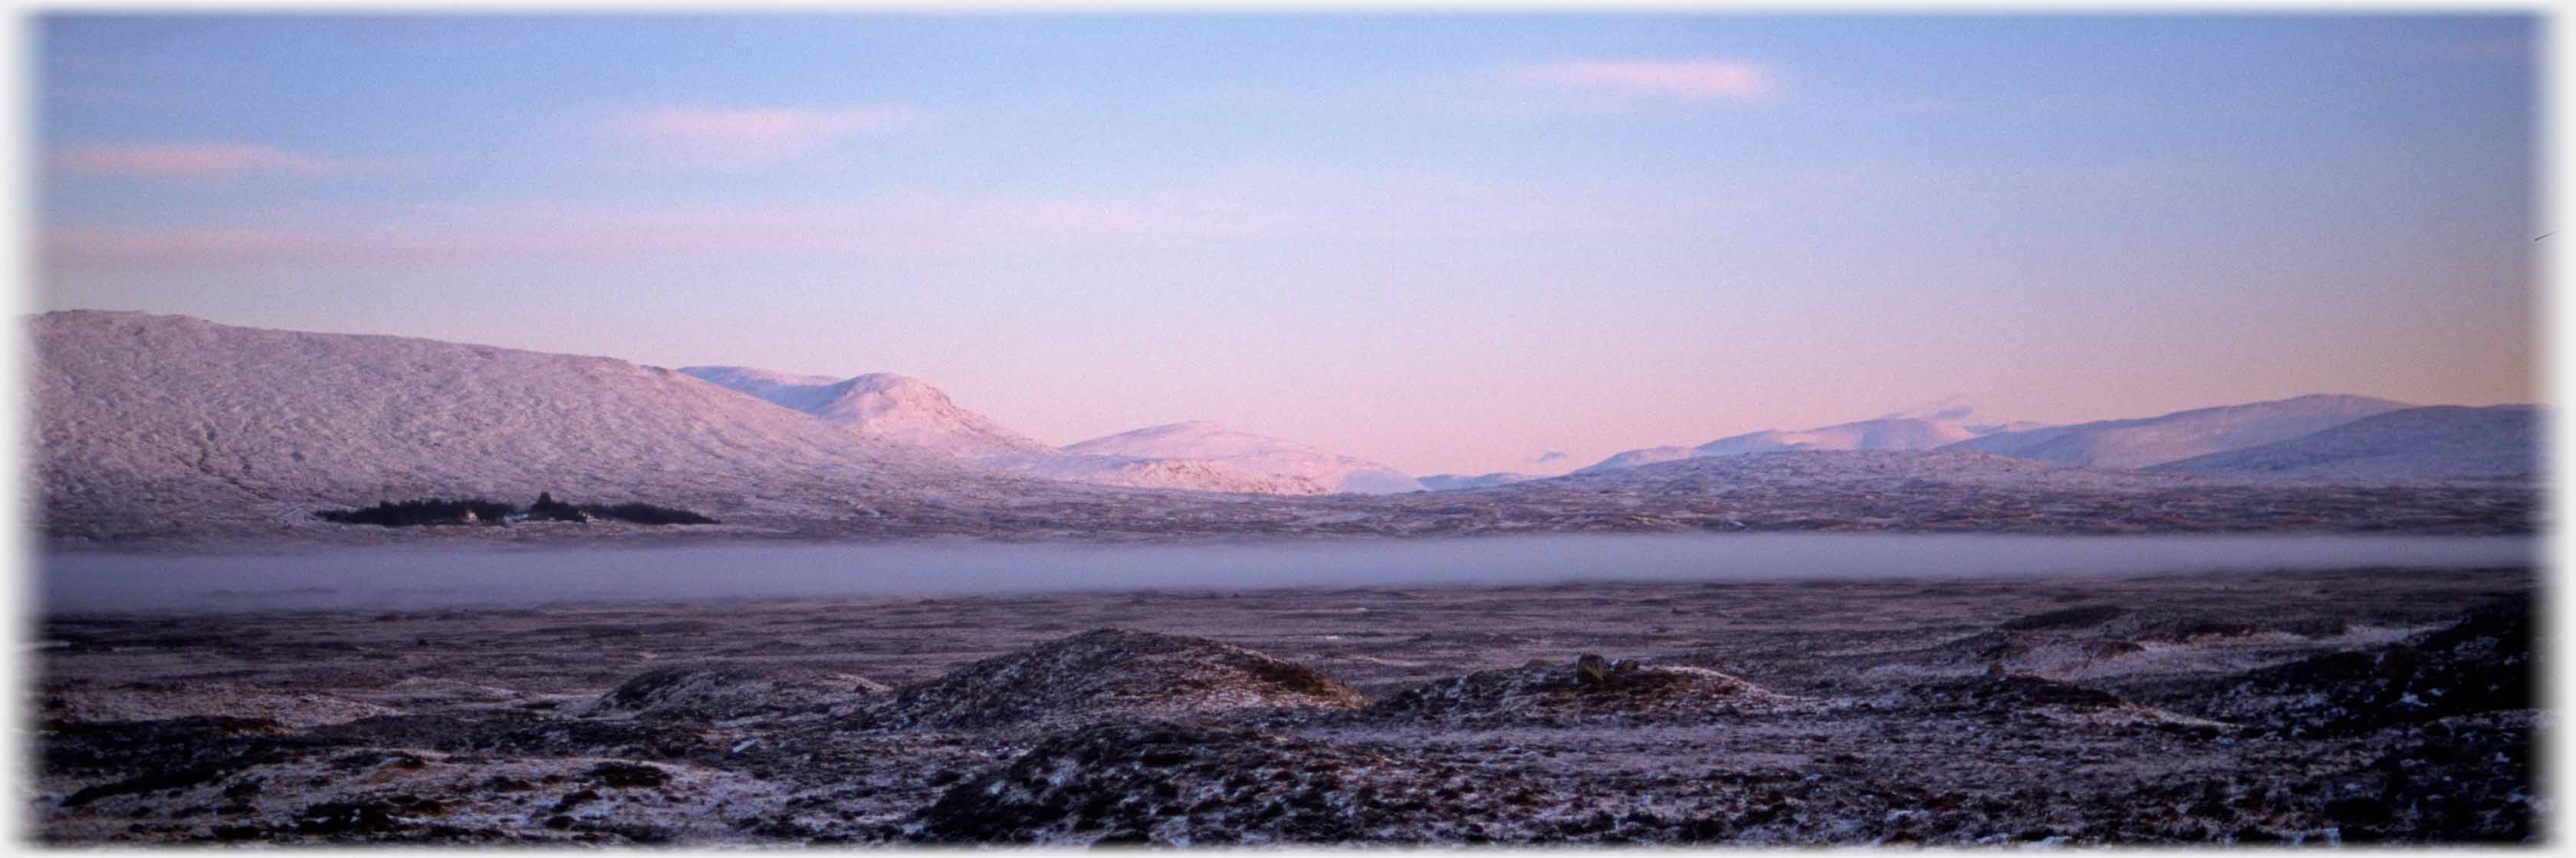 Pink lit snow covered hills across large flat area with mist hanging.